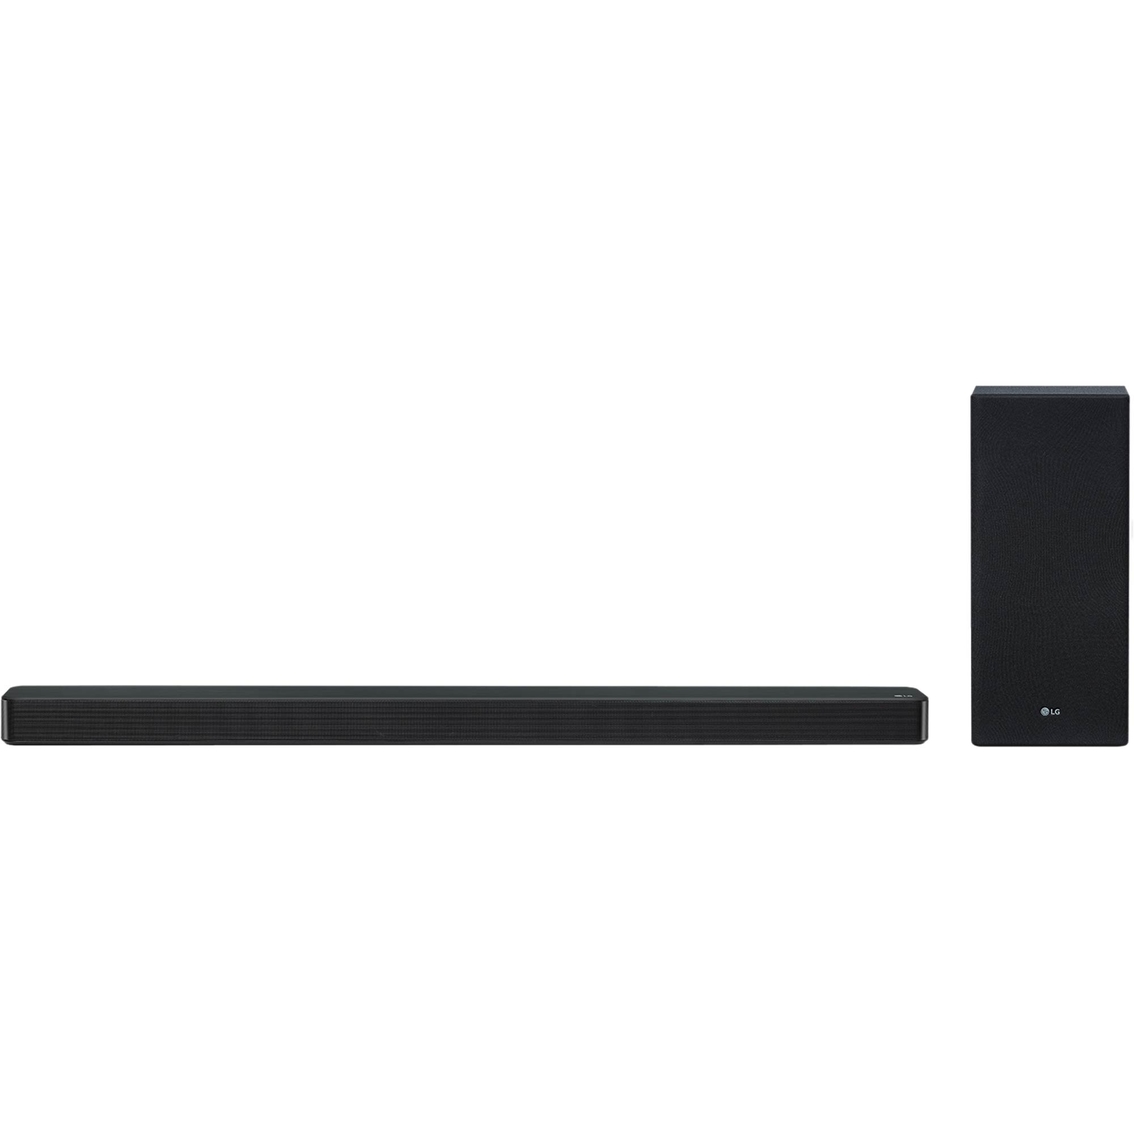 Lg 3.1 High Res Audio Sound Bar With Built-in Chromecast | Speakers | Electronics | Shop The Exchange